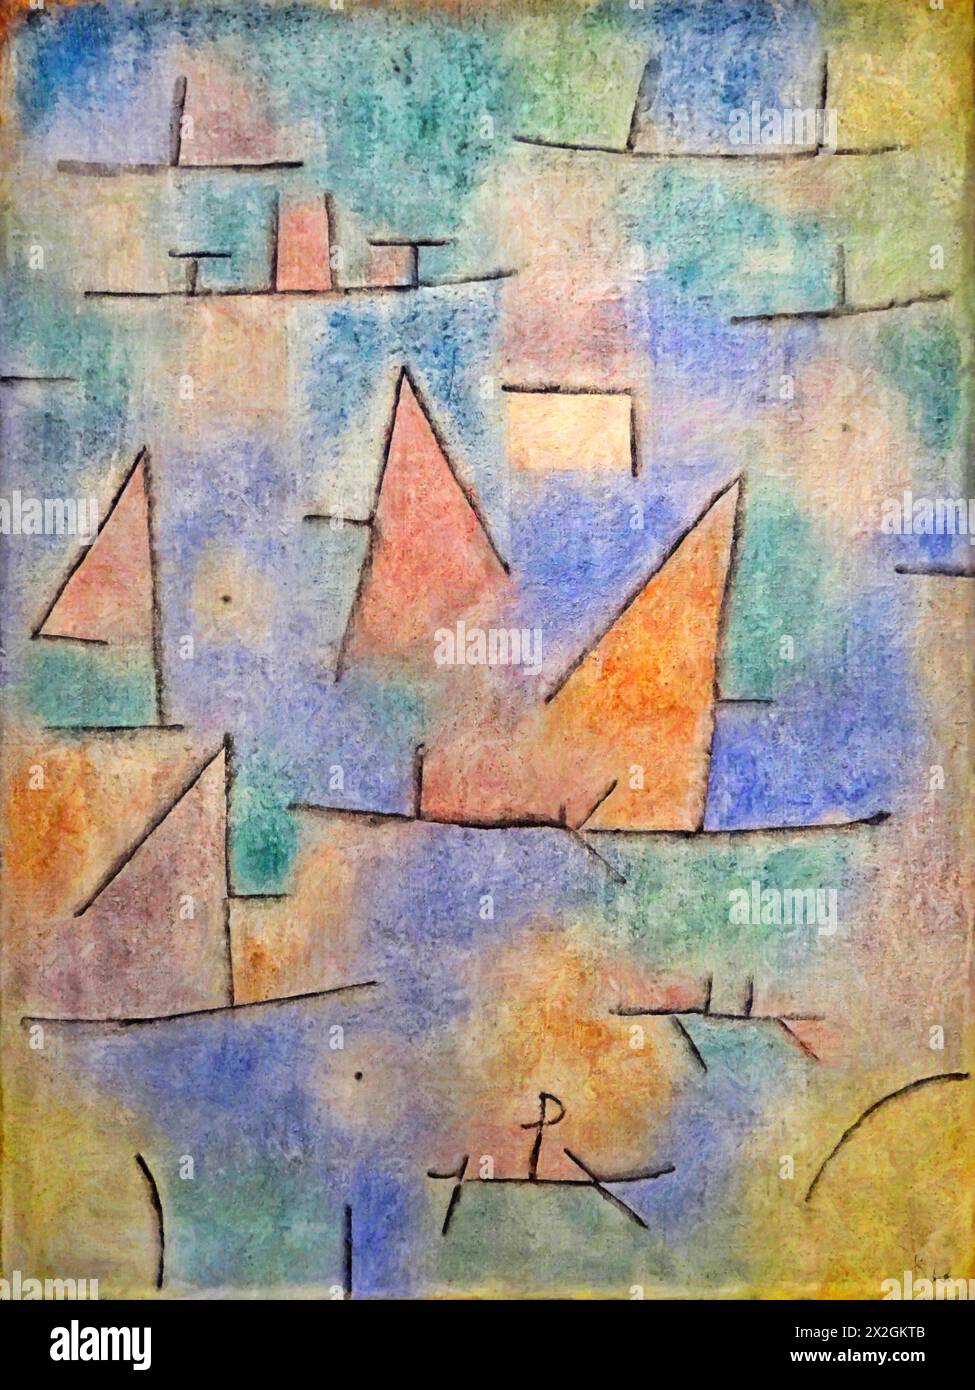 Port and Sailboats, 1937 (Painting) by Artist Klee, Paul (1879-1940) Swiss. Stock Vector